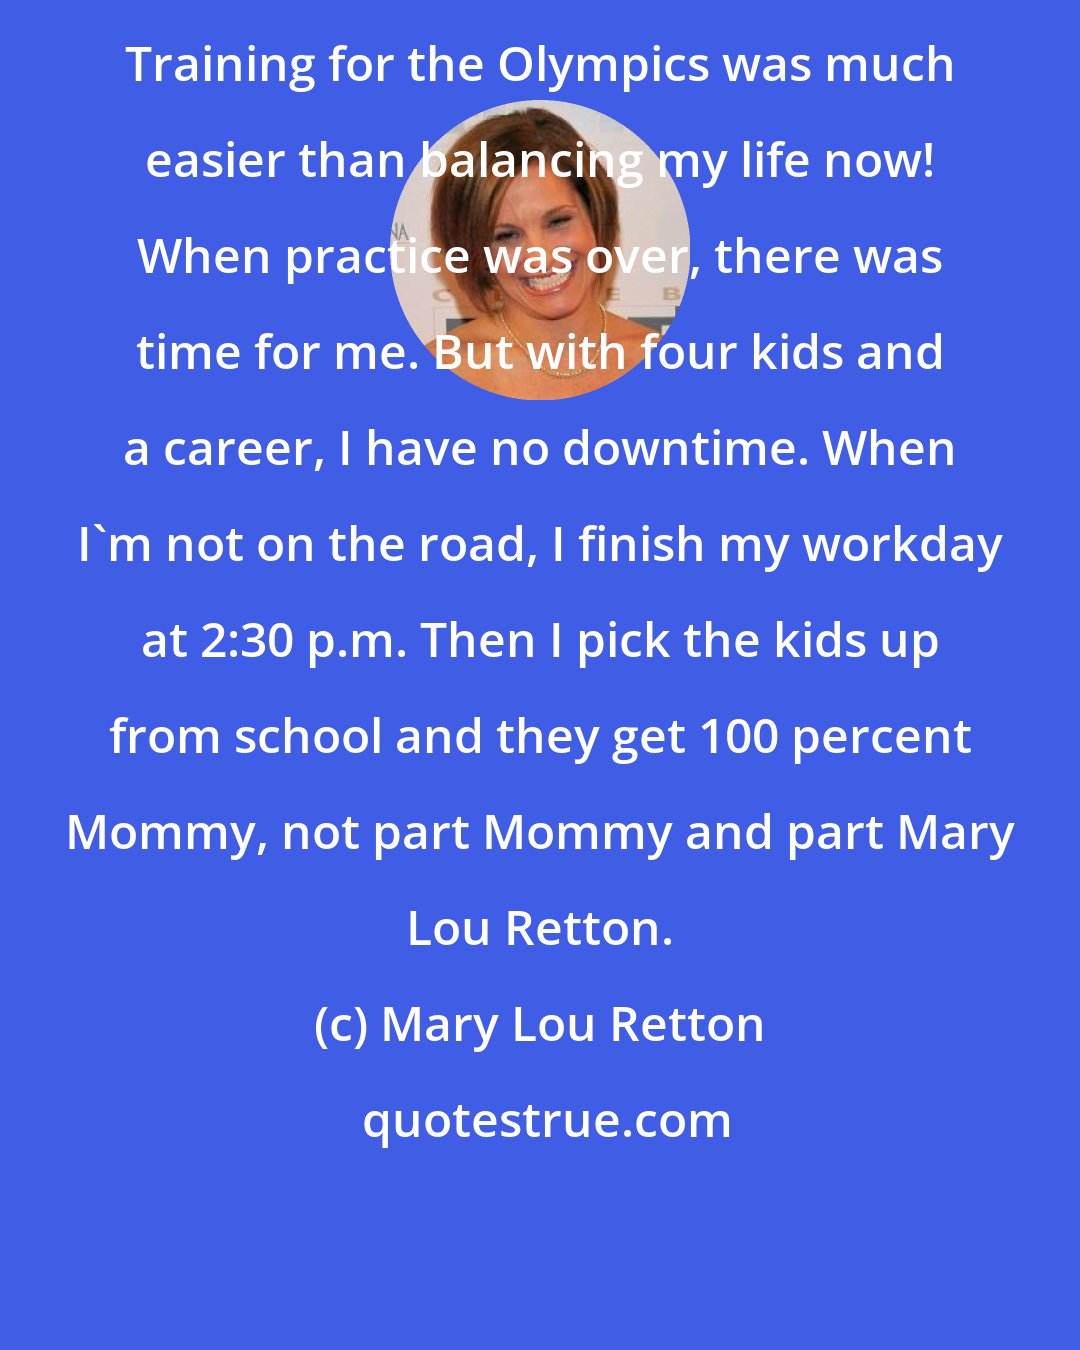 Mary Lou Retton: Training for the Olympics was much easier than balancing my life now! When practice was over, there was time for me. But with four kids and a career, I have no downtime. When I'm not on the road, I finish my workday at 2:30 p.m. Then I pick the kids up from school and they get 100 percent Mommy, not part Mommy and part Mary Lou Retton.